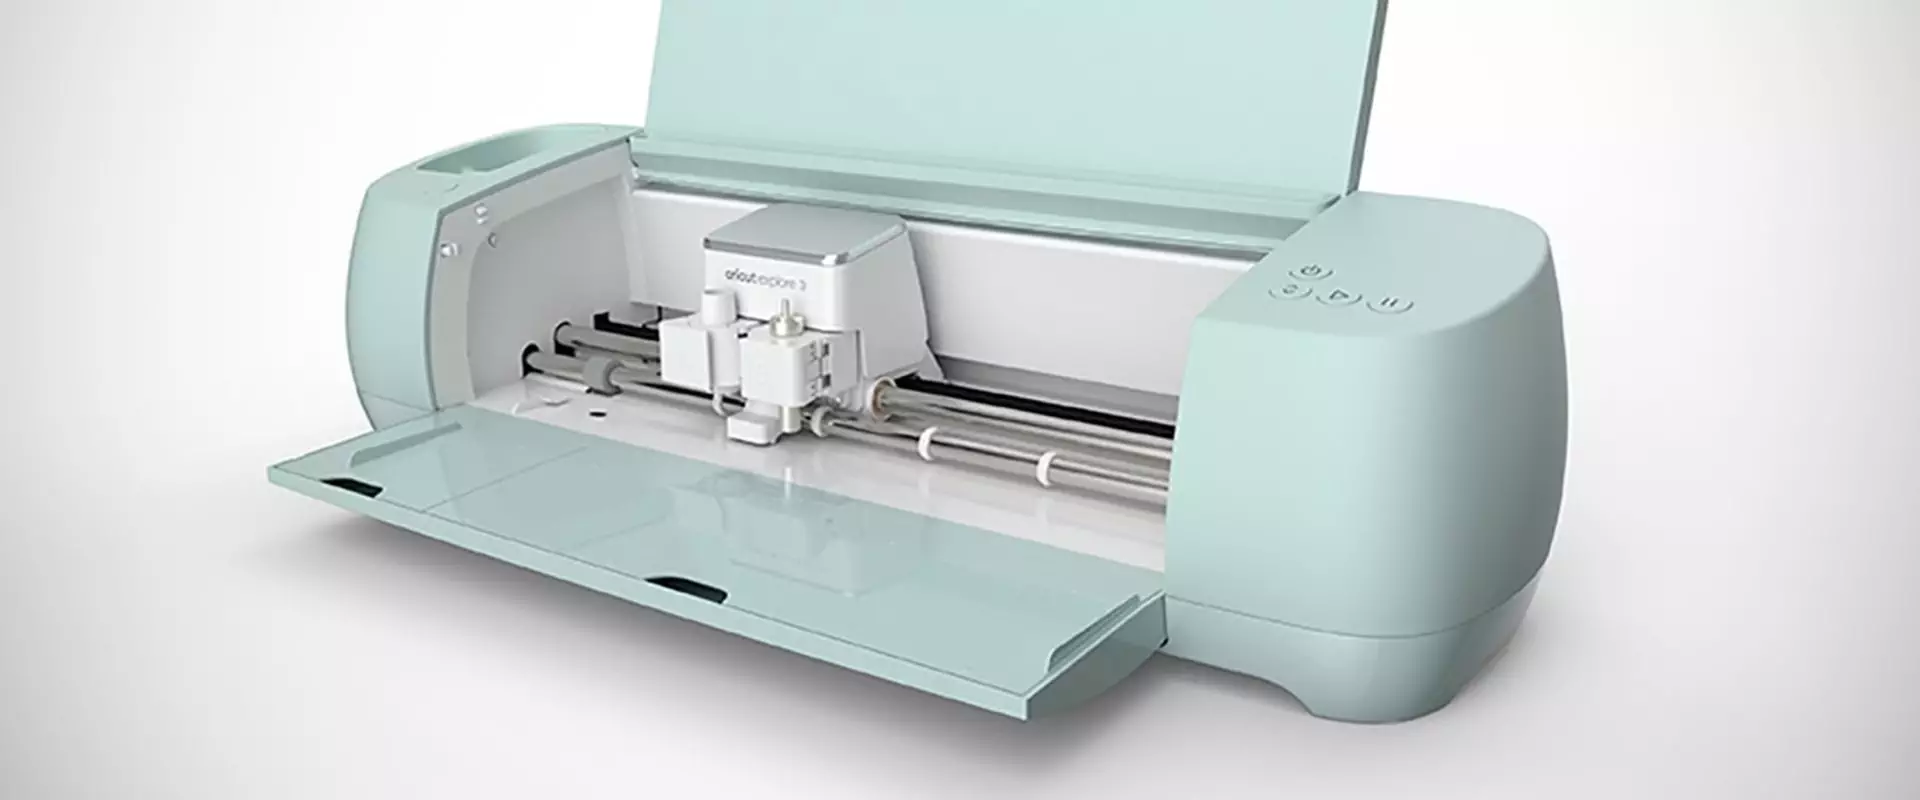 What is a cricut machine and what can I do with it?